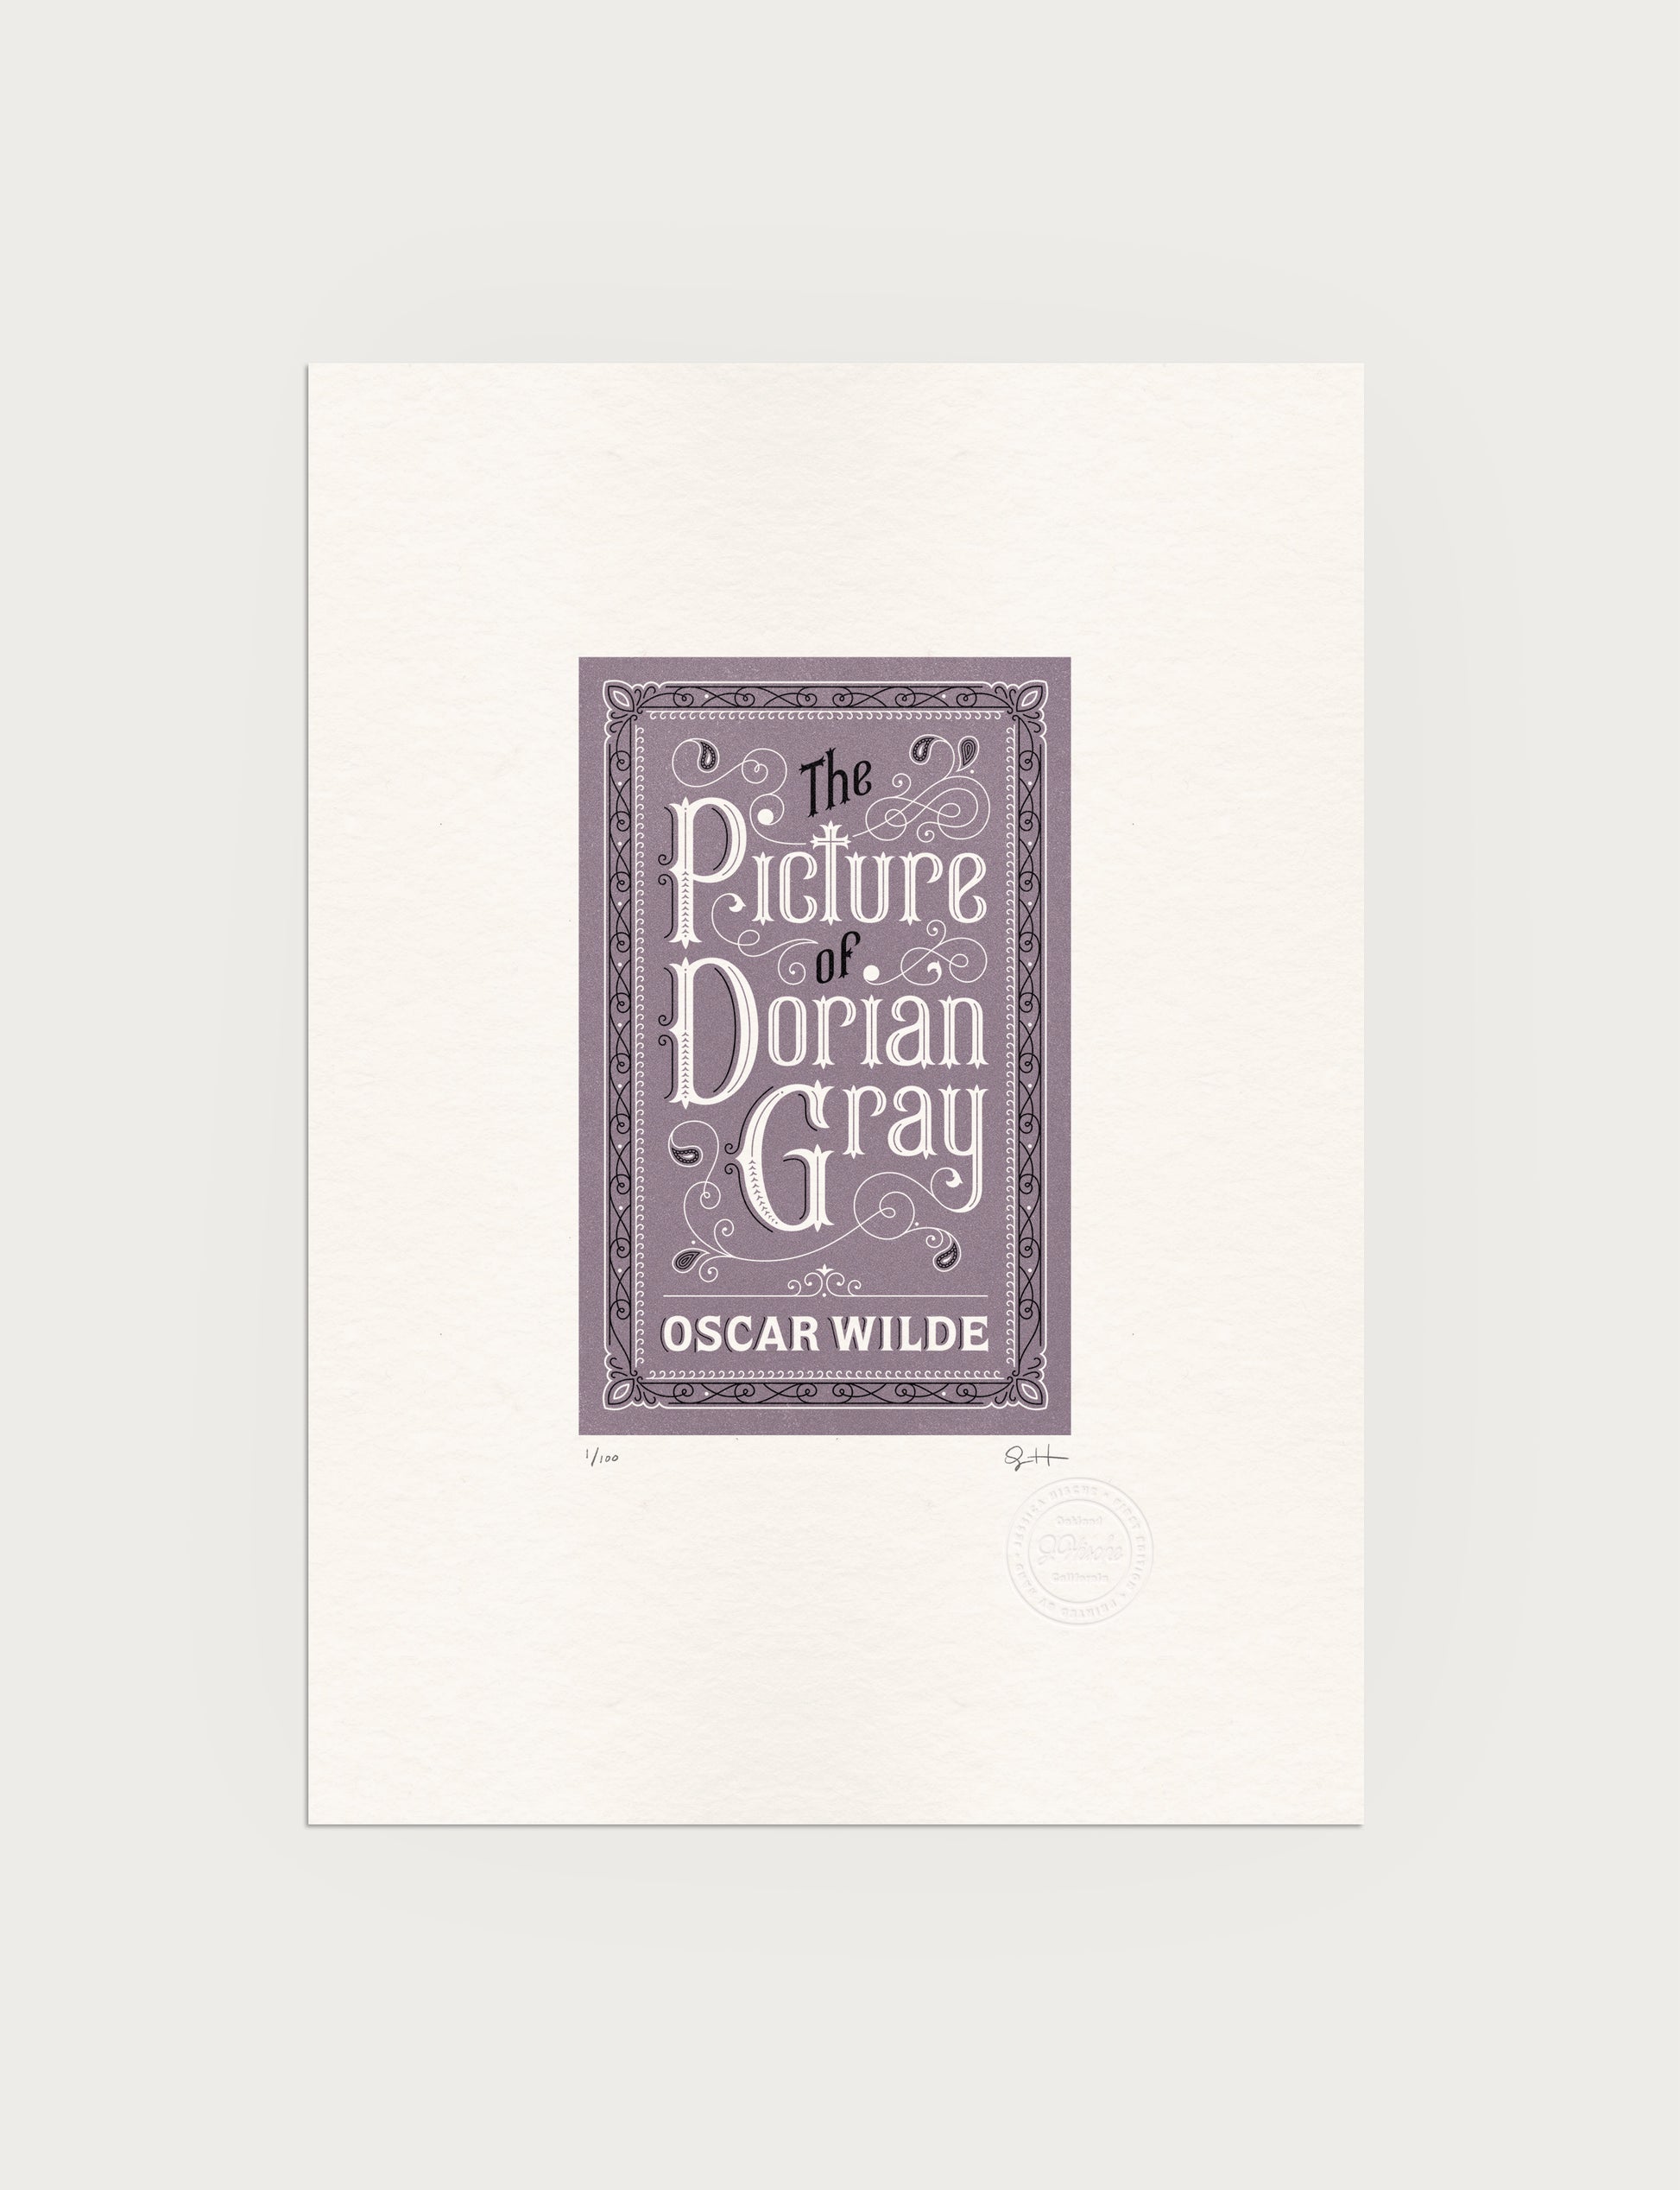 2-color letterpress print in violet and black. Printed artwork is an illustrated book cover of The Picture of Dorian Gray including custom hand lettering.